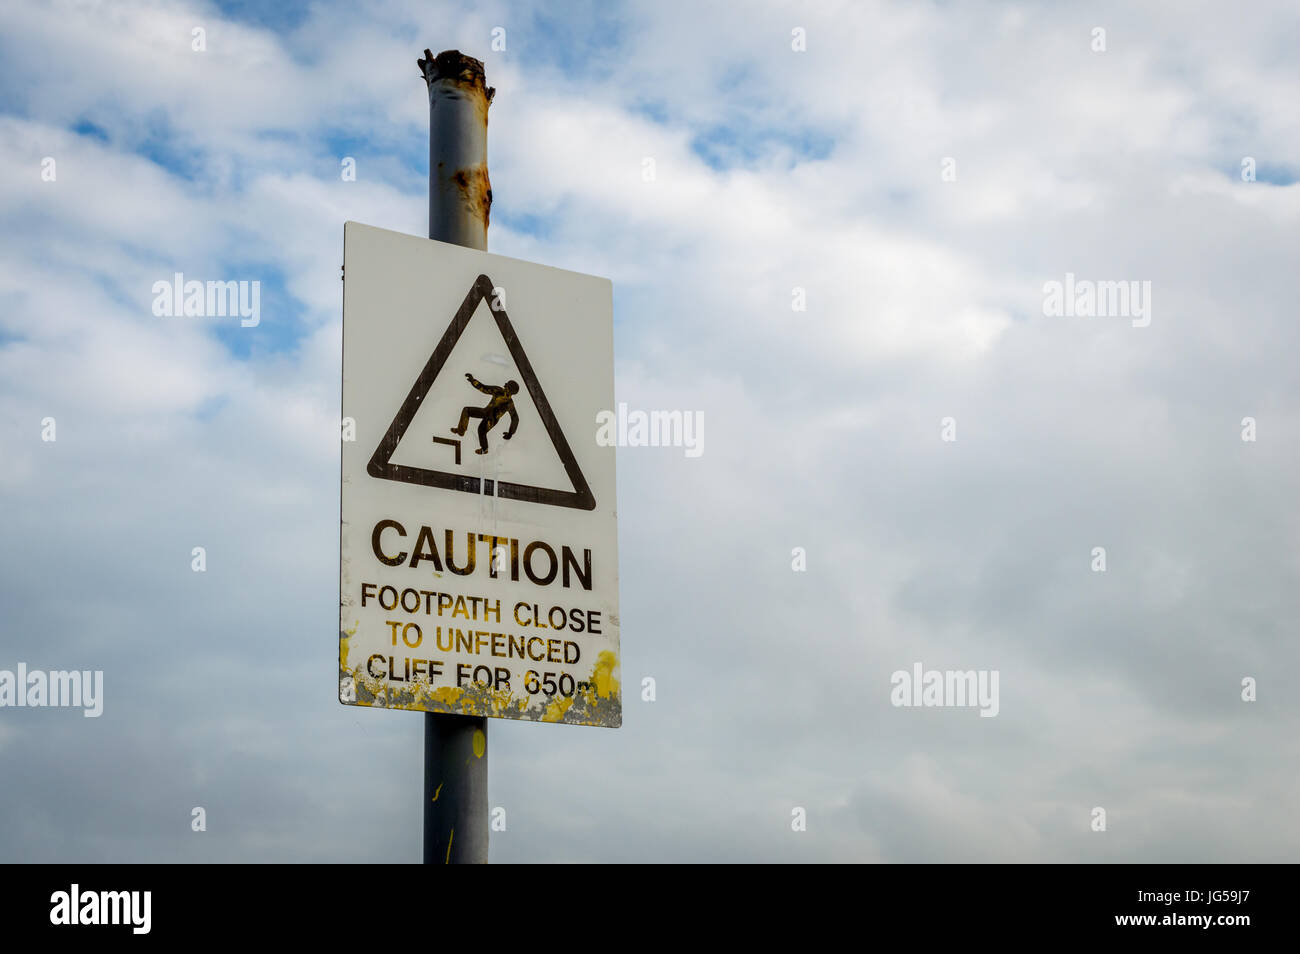 Caution - Footpath close to unfenced cliff for 350m Stock Photo